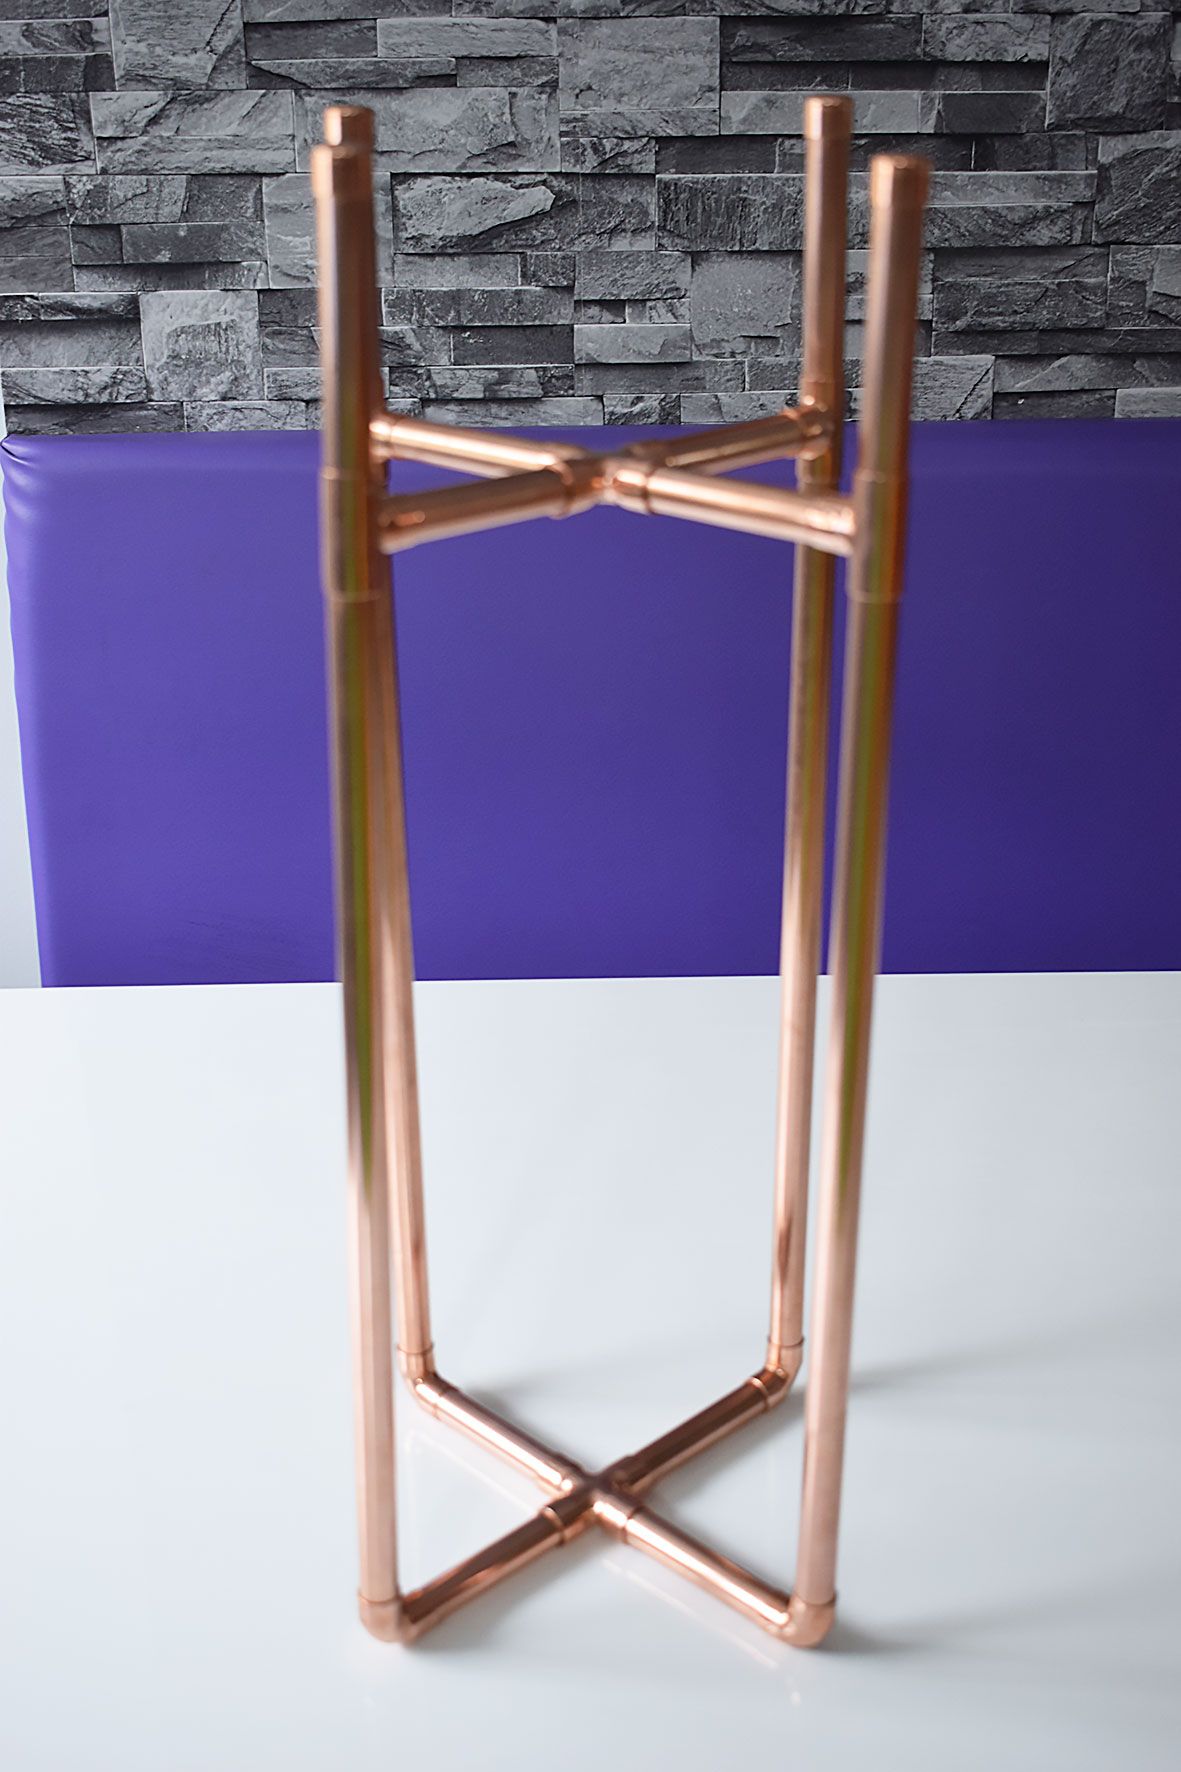 How To Make A Diy Copper Plant Stand – Caradise Intended For Copper Plant Stands (View 12 of 15)